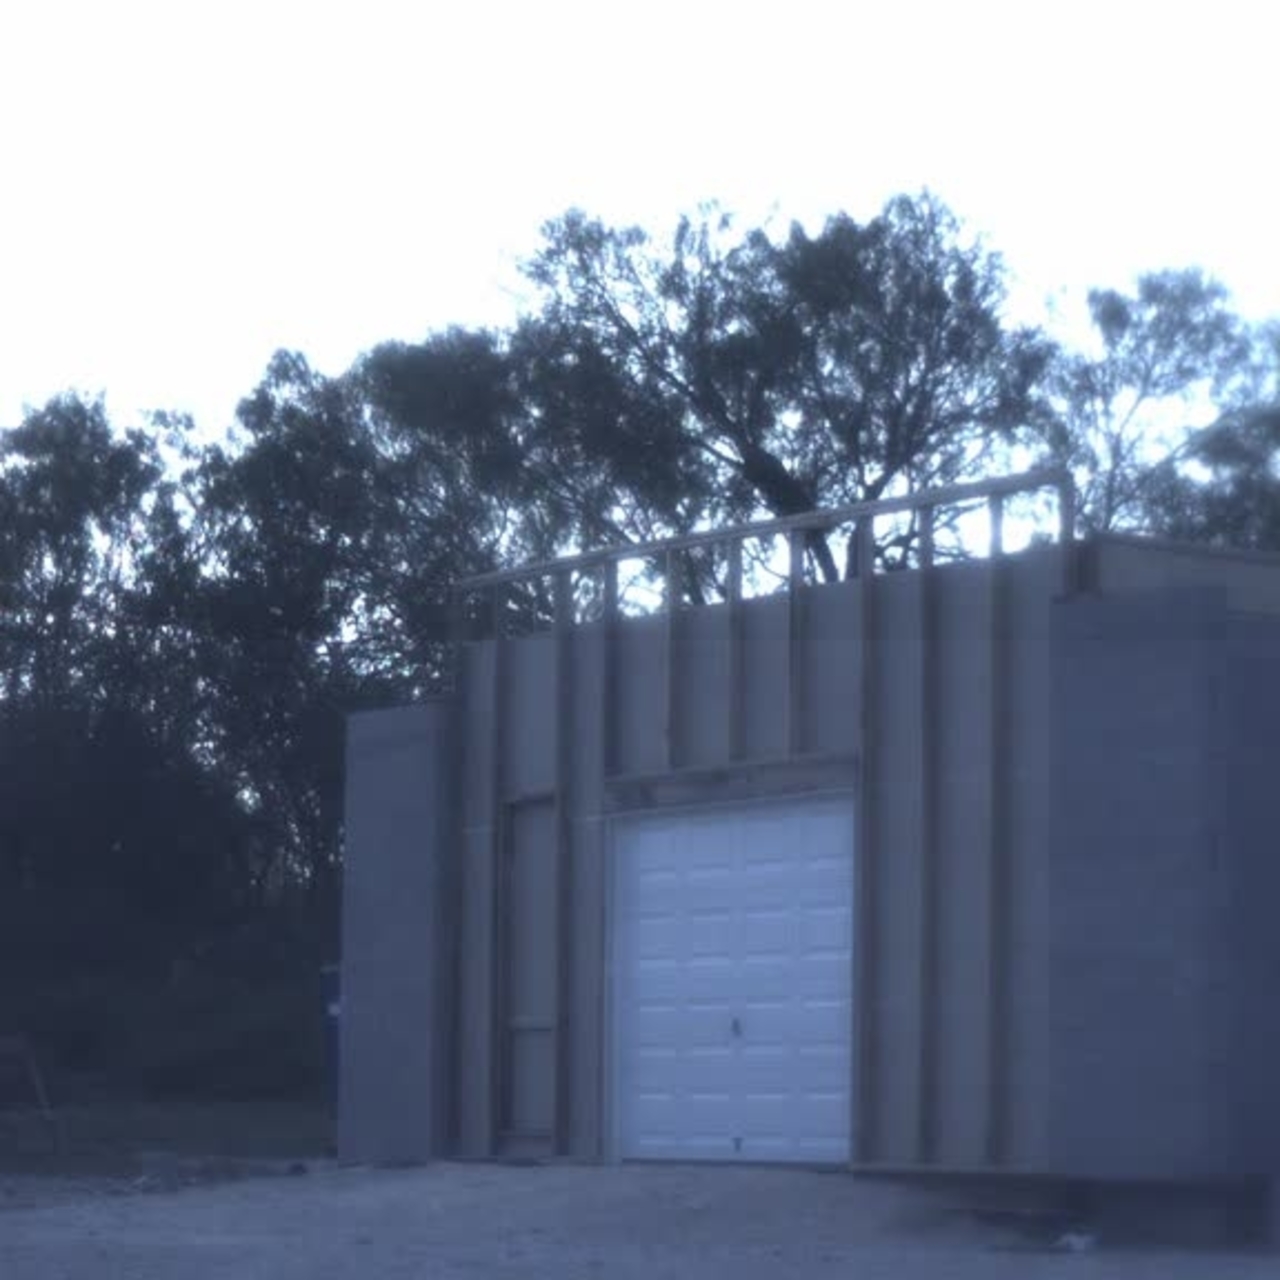 Test 7: Dispersion and Burning Behavior of Hydrogen Released in a Full-Scale Residential Garage in the Presence and Absence of Conventional Automobiles (View of garage exterior from high-speed camera)